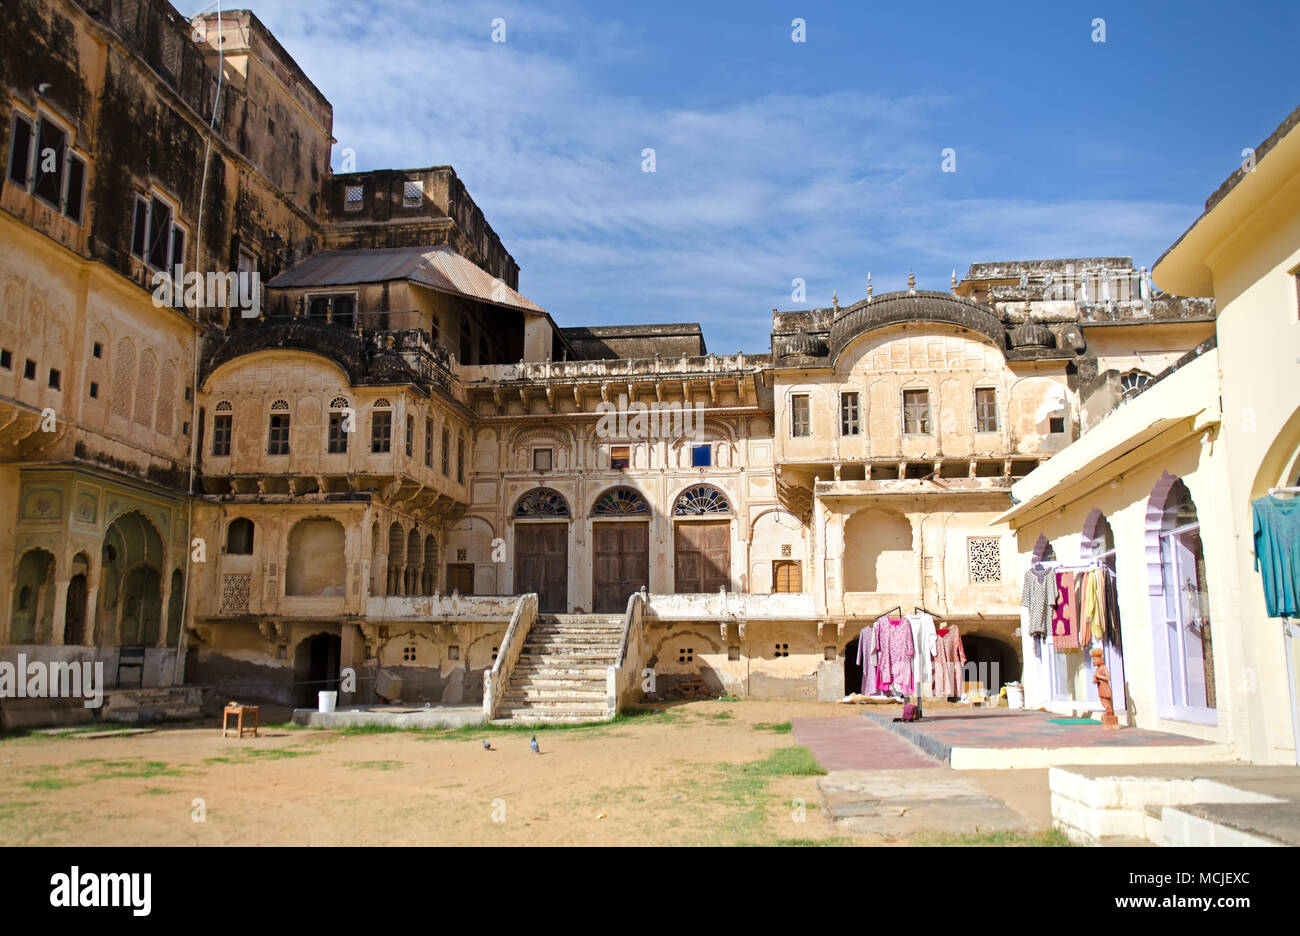 Old building of historical palace in Mandawa, Rajasthan, India. Stock Photo